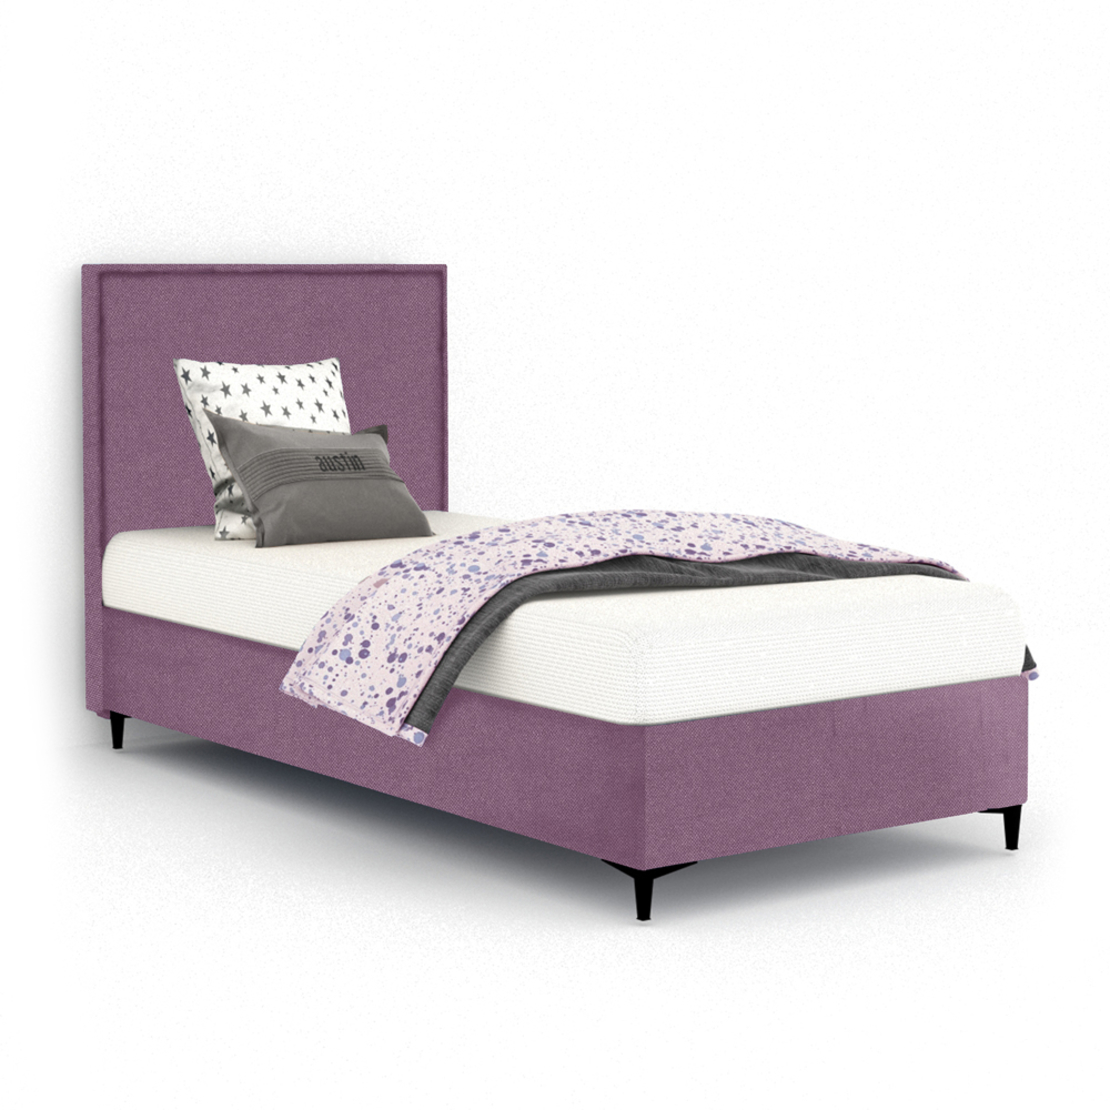 FRAME BED WITH STORAGE (FOR MATTRESS 90x200cm) CHENILLE VIOLET 10-881 E1 TR